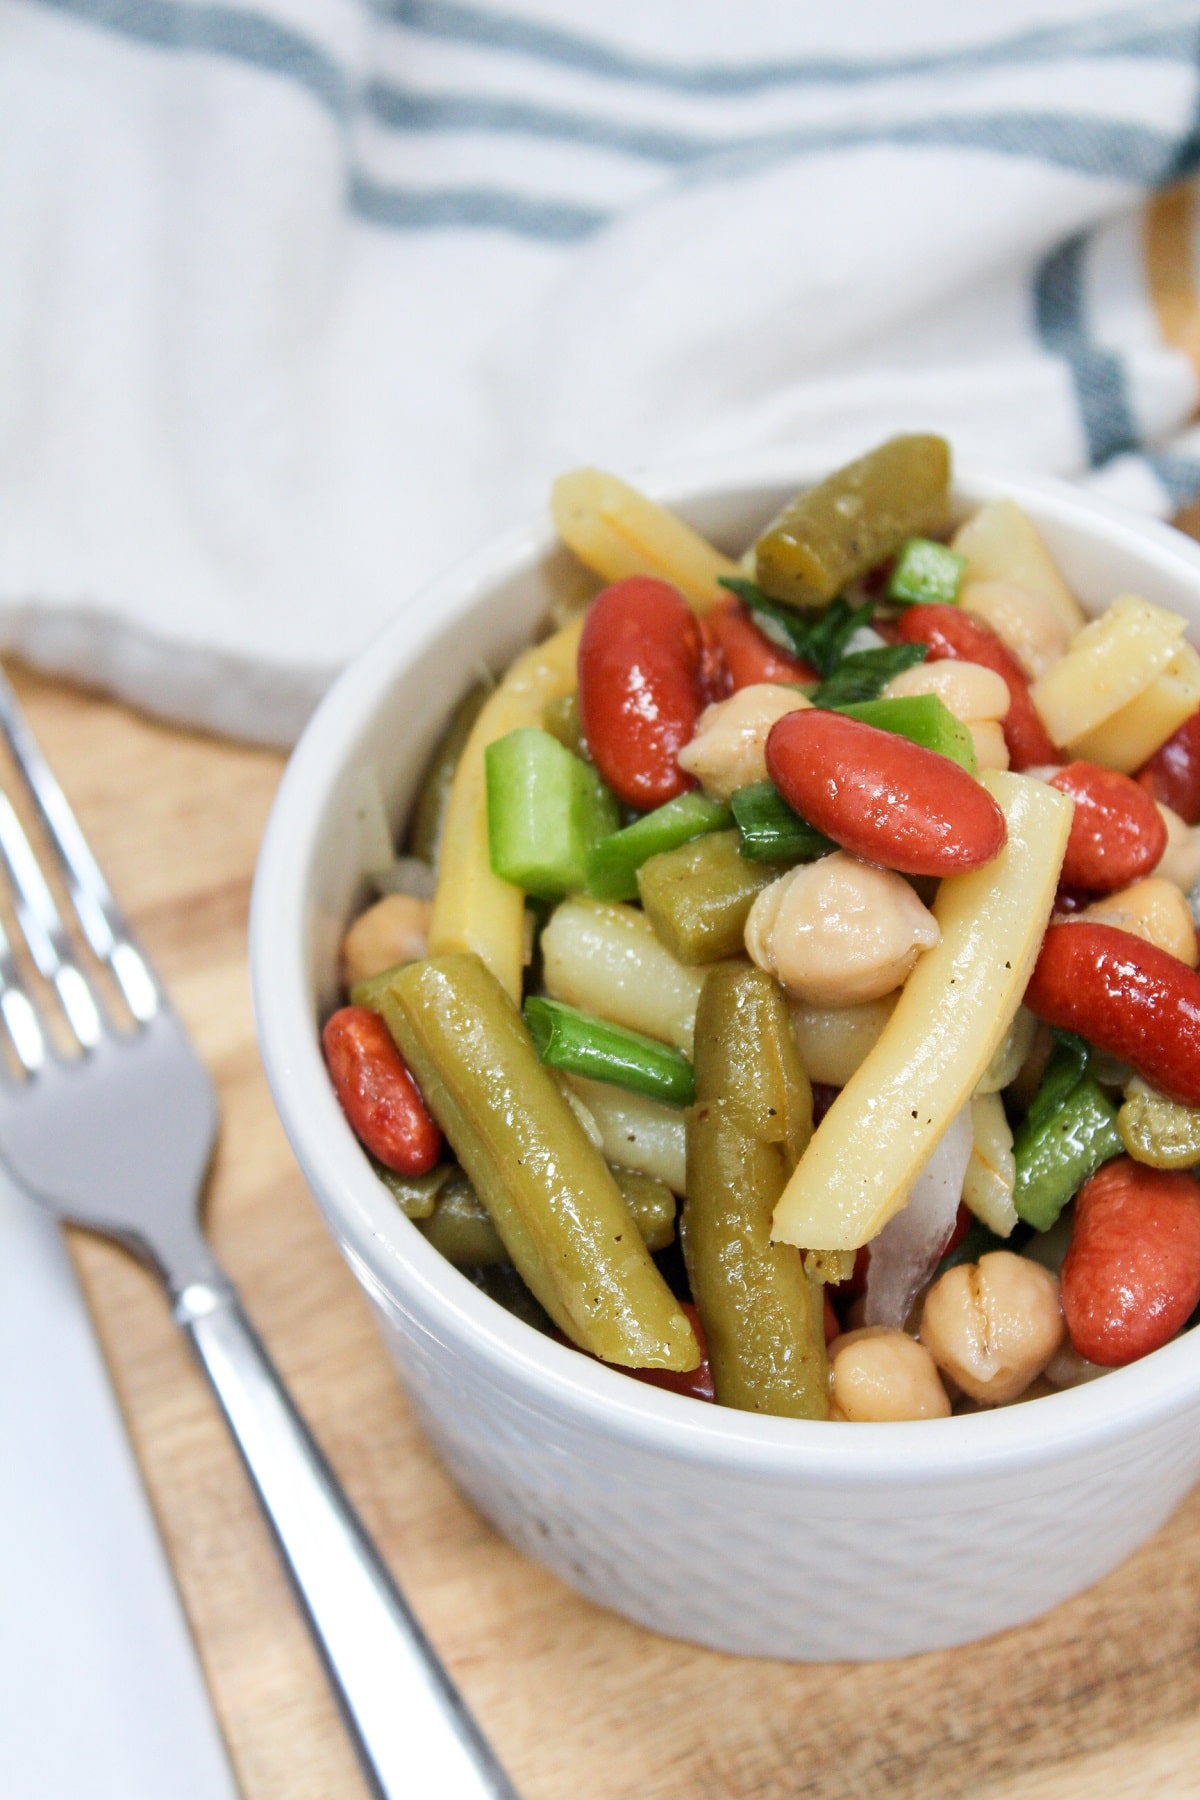 classic 3-bean salad in a small bowl